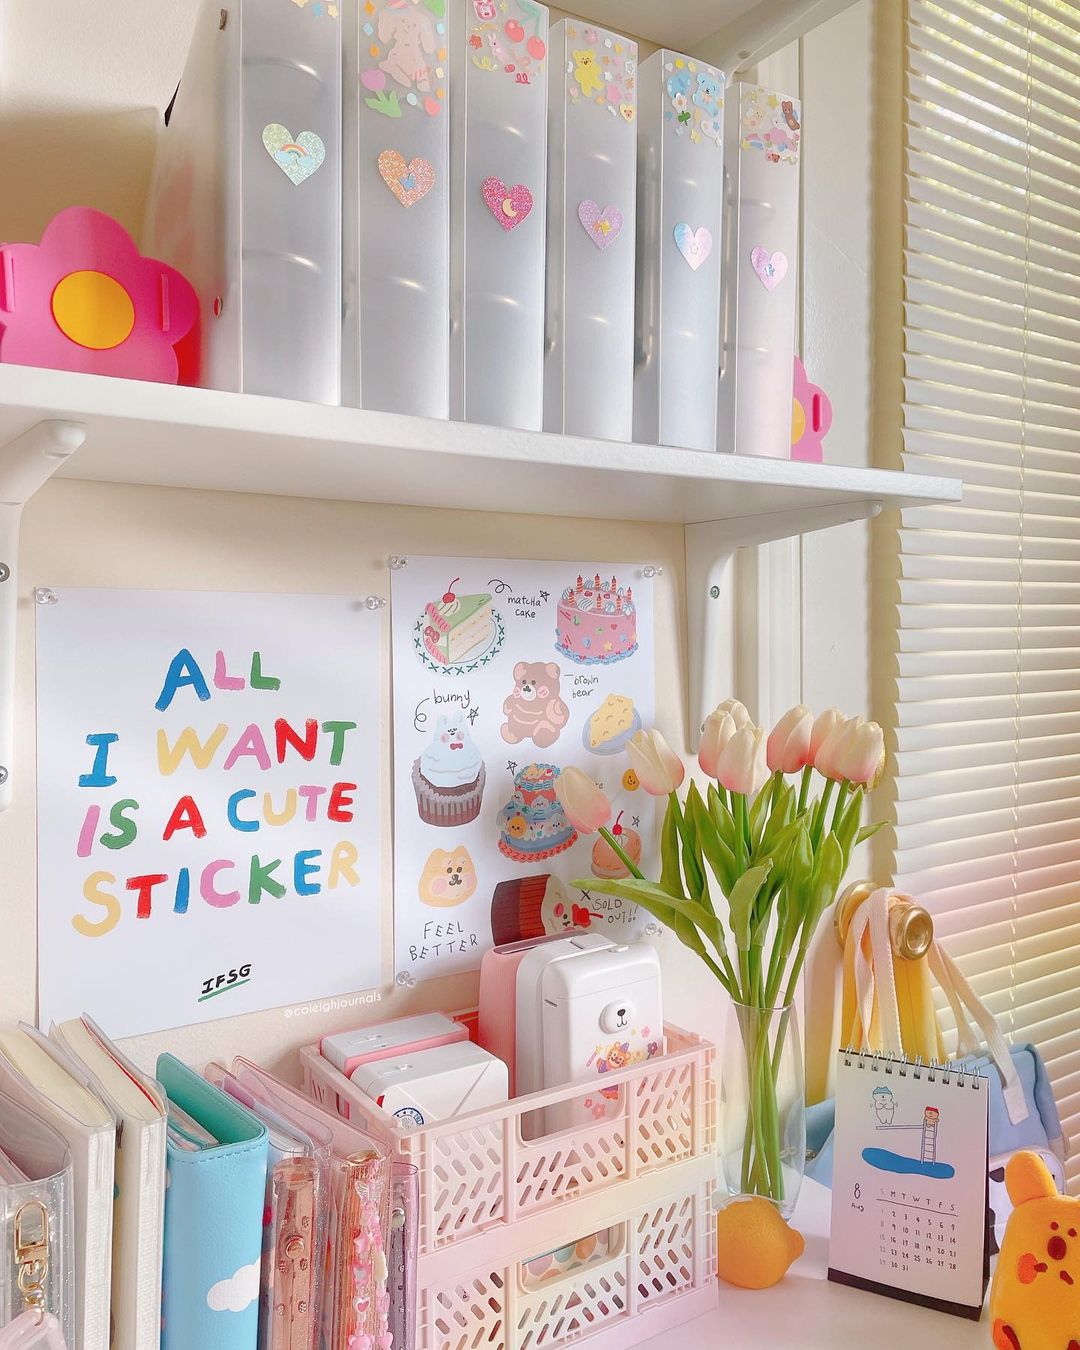 Organize Your Dorm Room With These 6 Dollar Store Items - Society19